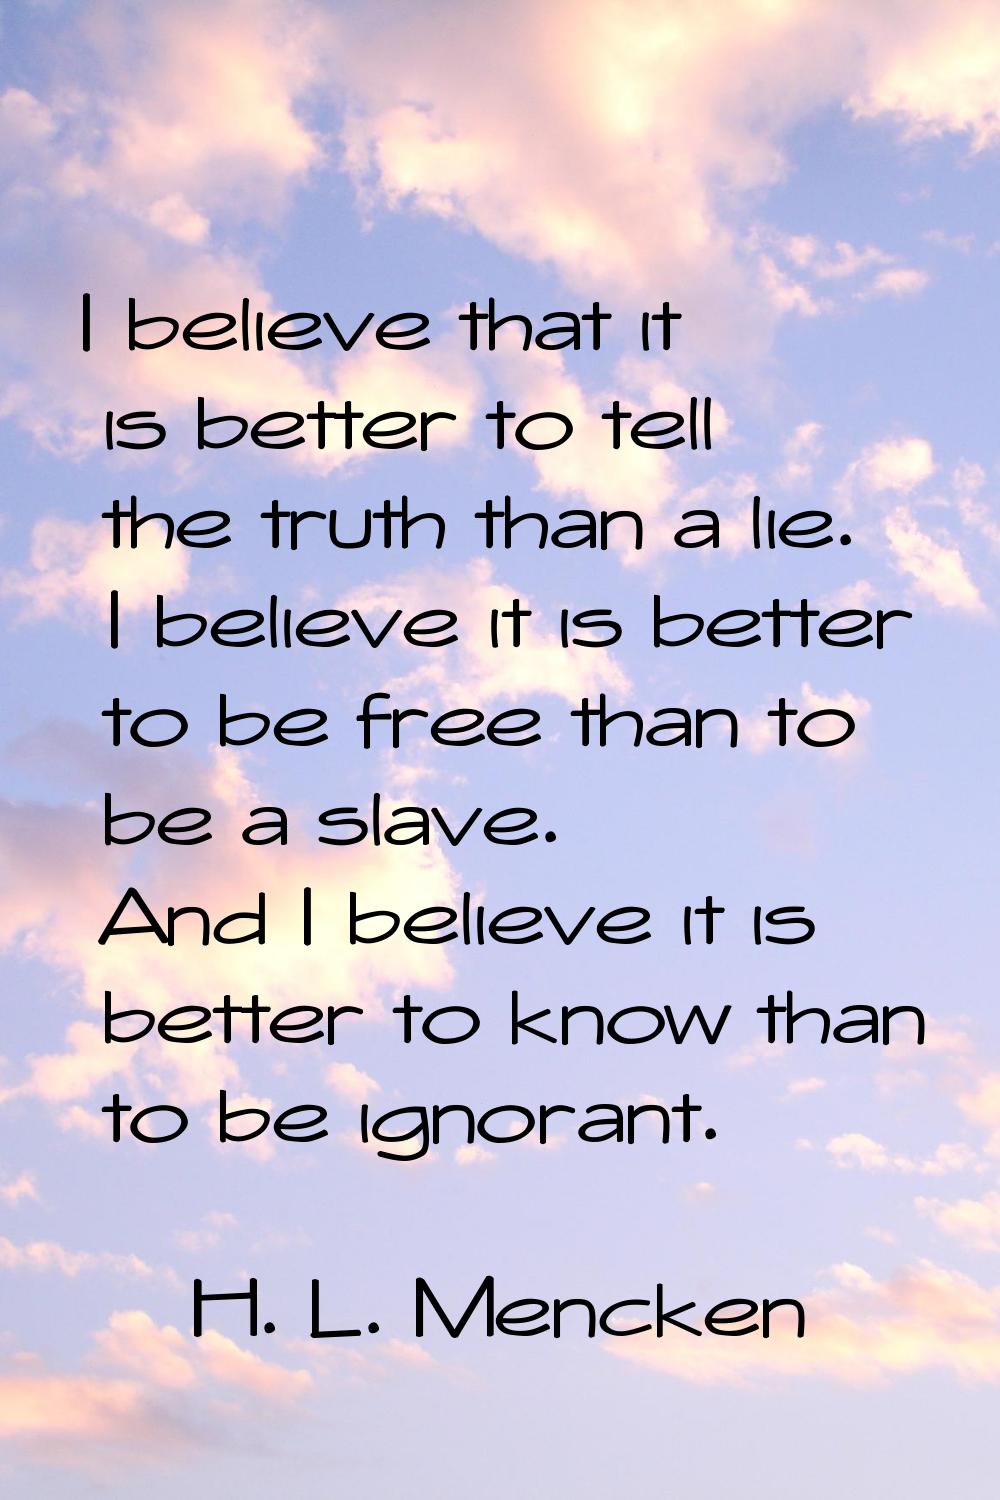 I believe that it is better to tell the truth than a lie. I believe it is better to be free than to